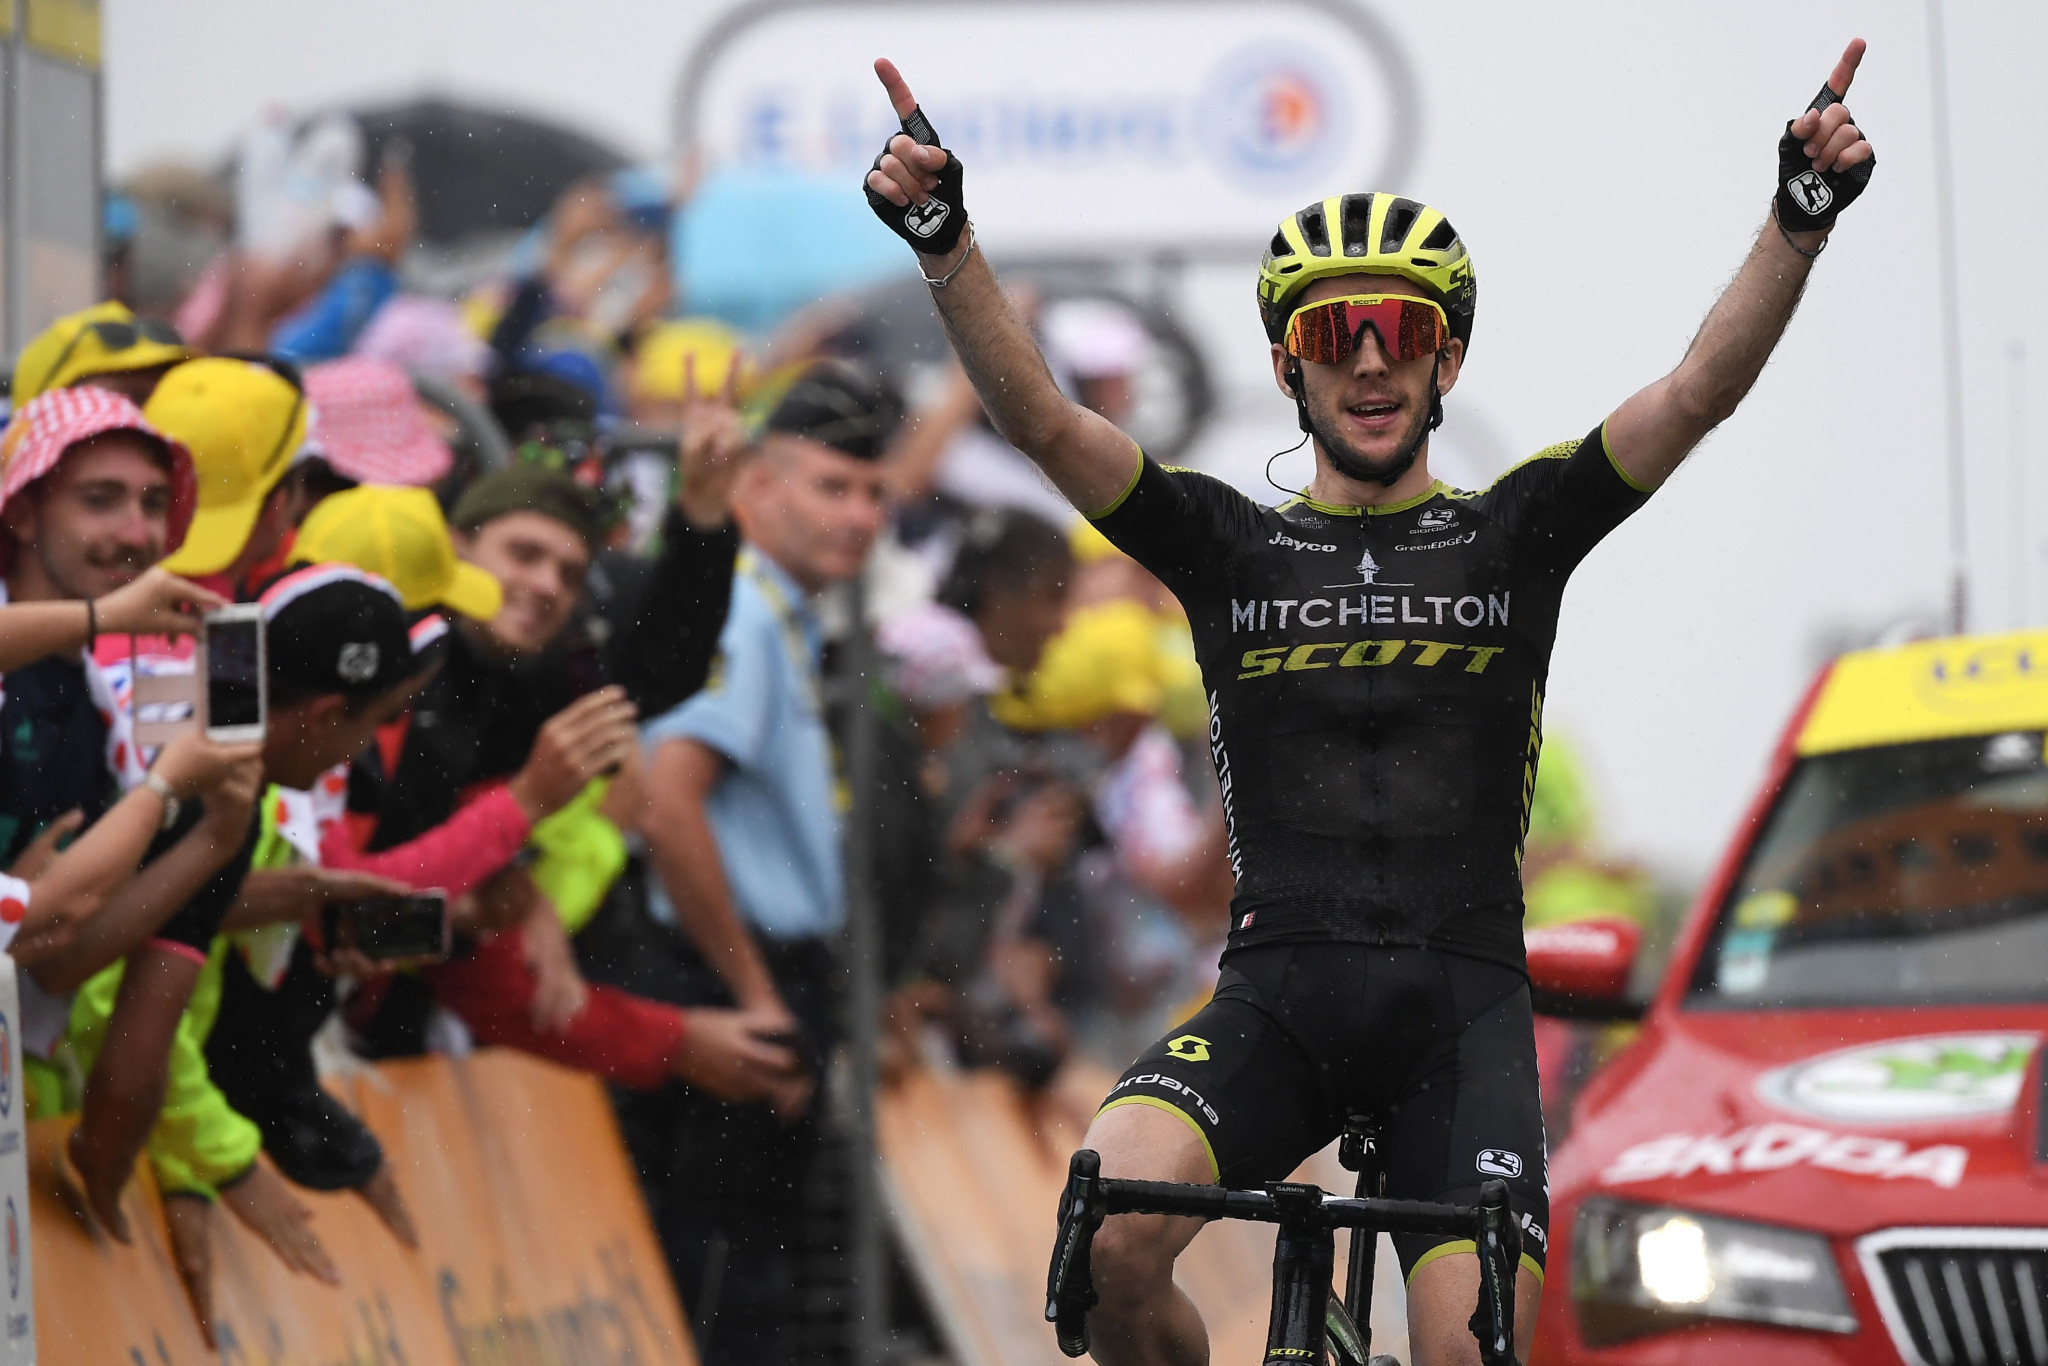 Britain's Simon Yates claimed his second stage victory at the Tour de France ©Getty Images